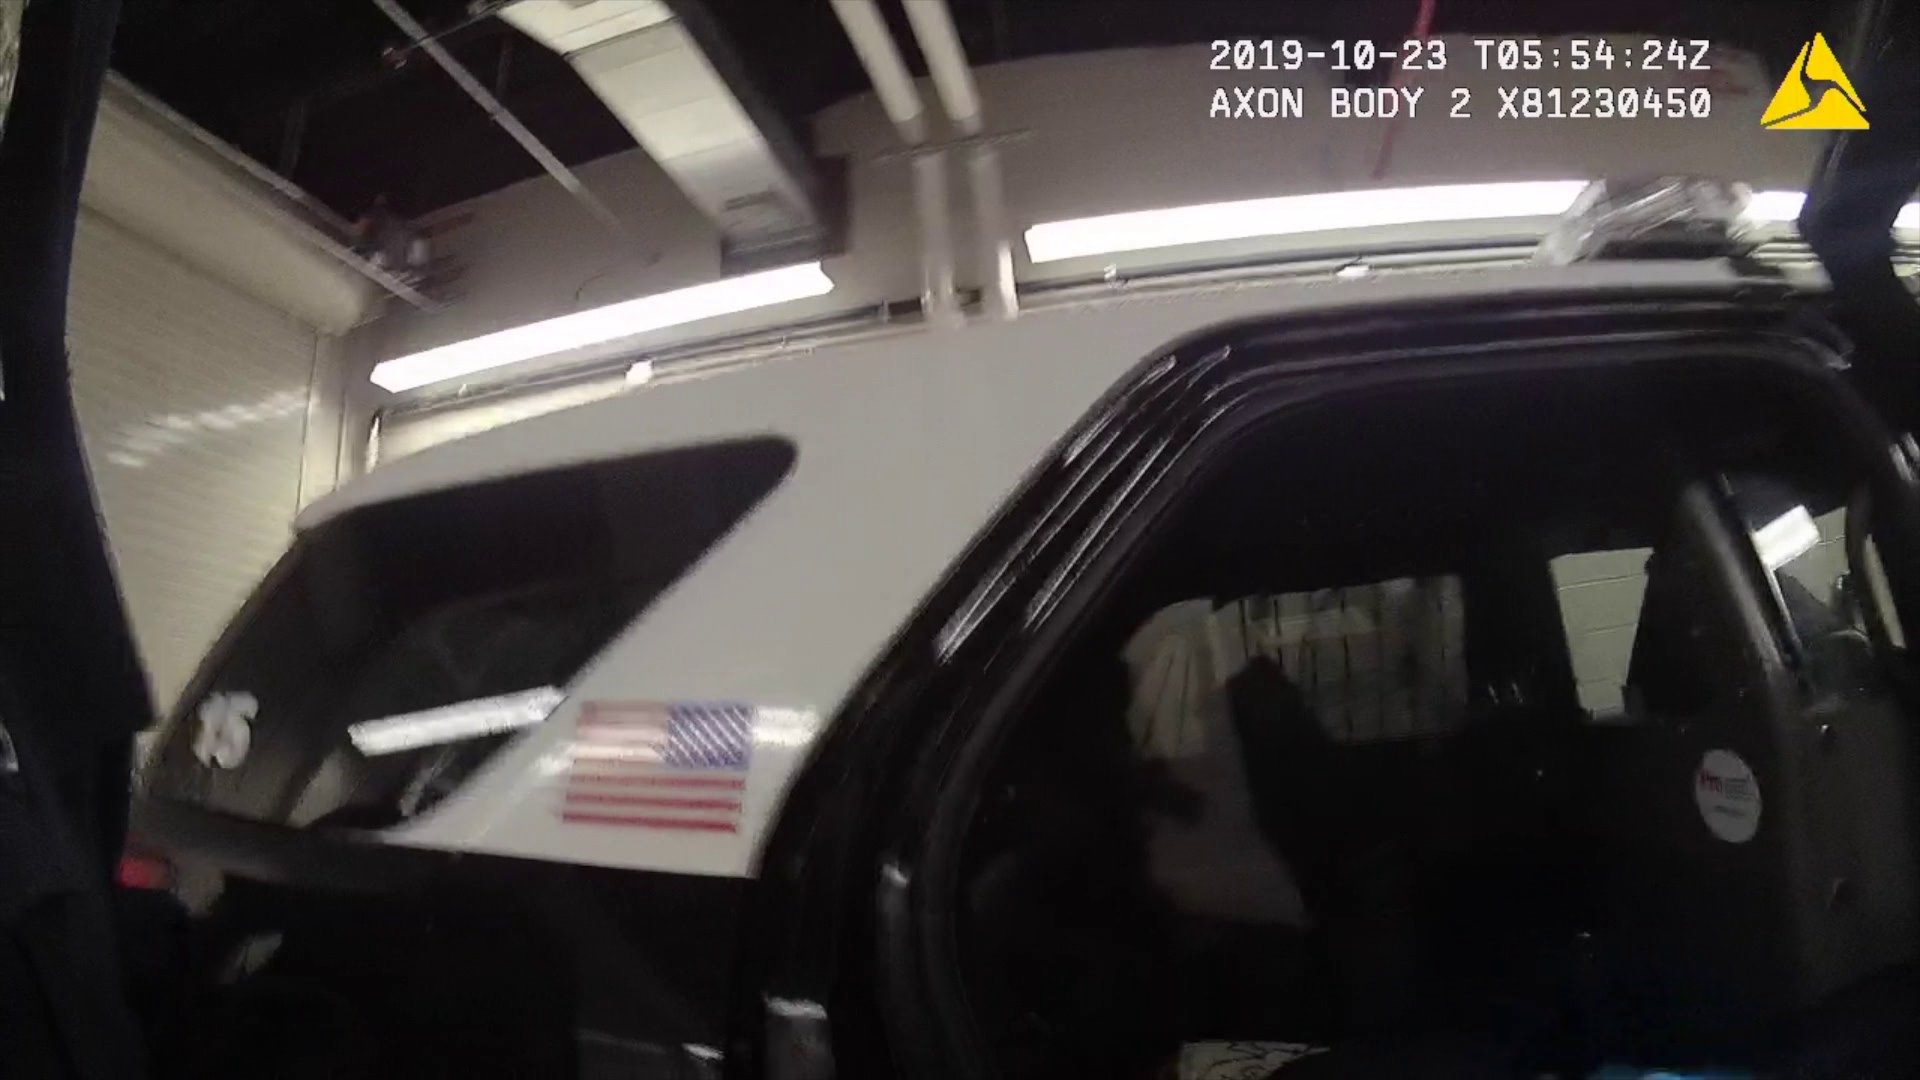 Body cam footage released of incident involving man who died in Stamford police custody - 7